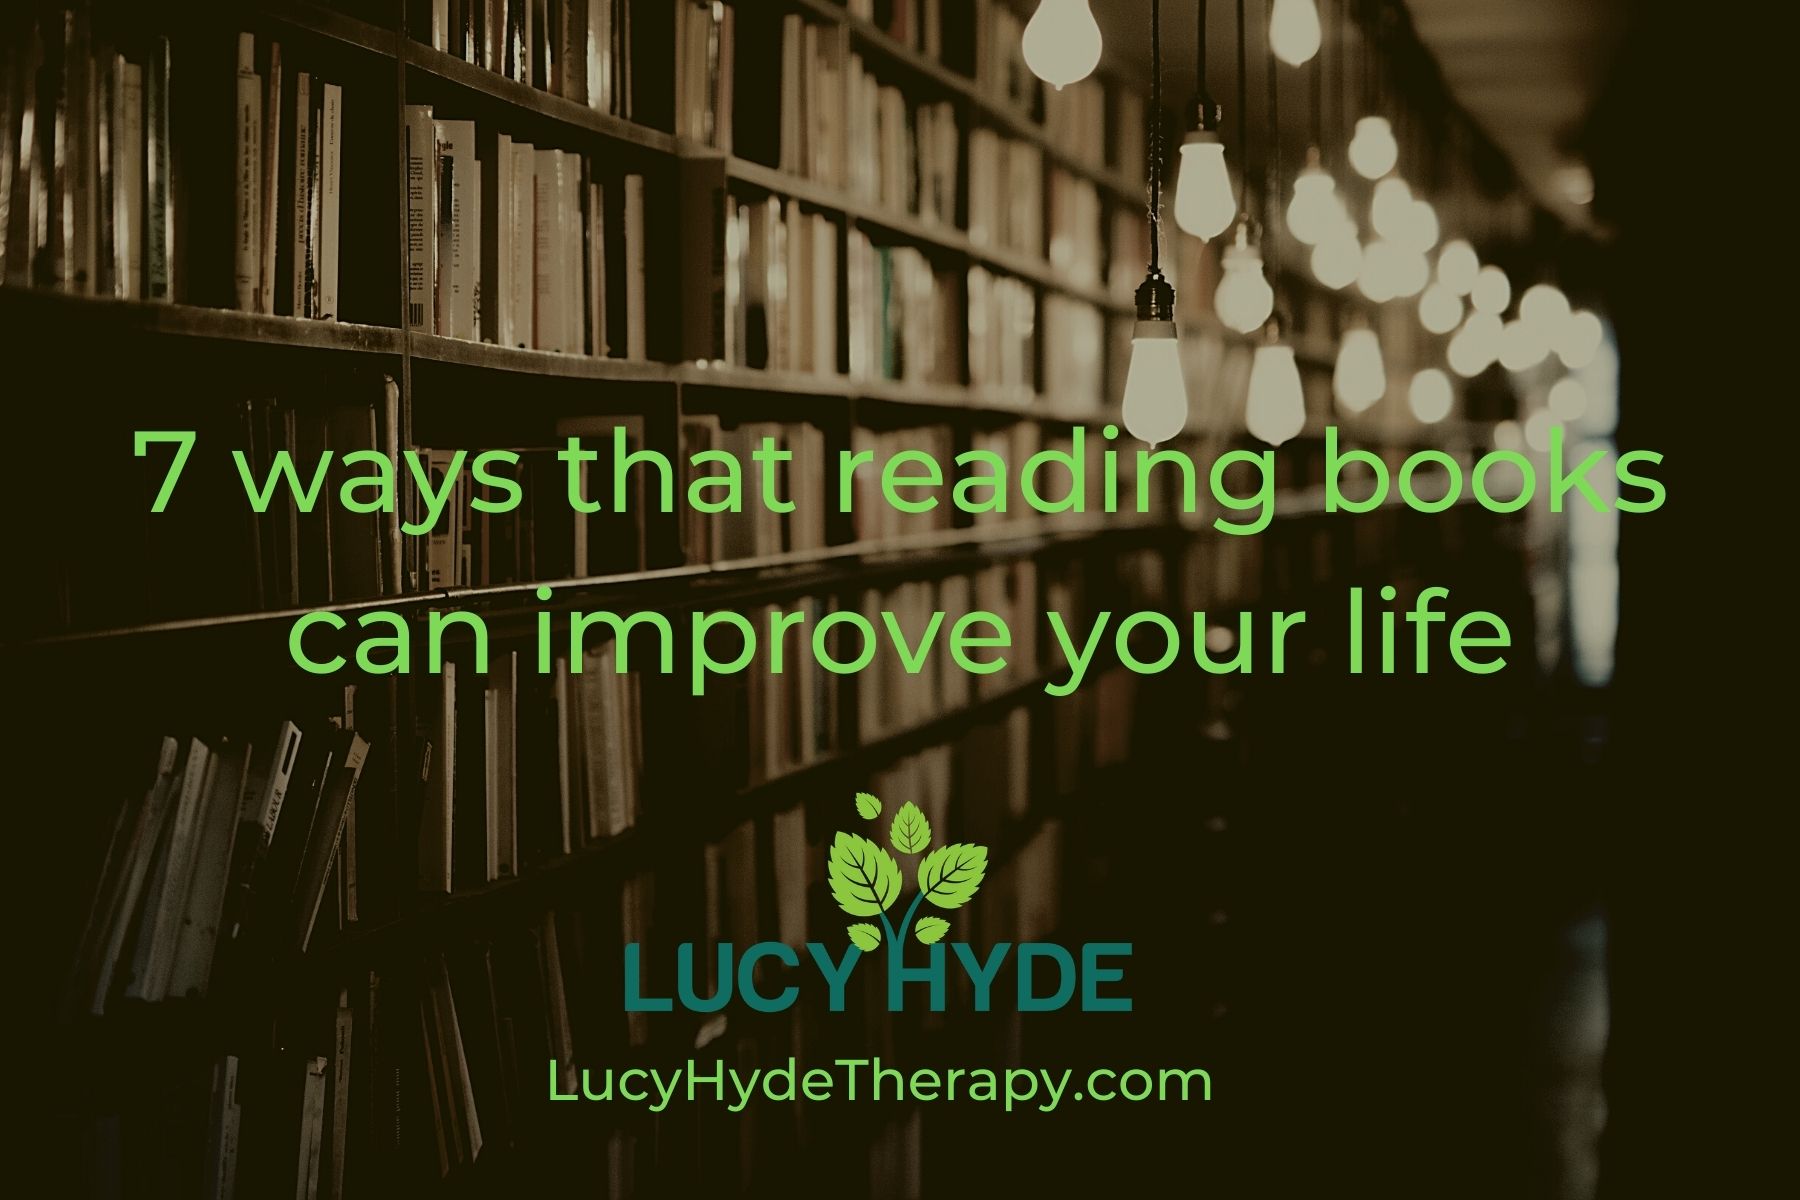 7 ways that reading books can improve your life